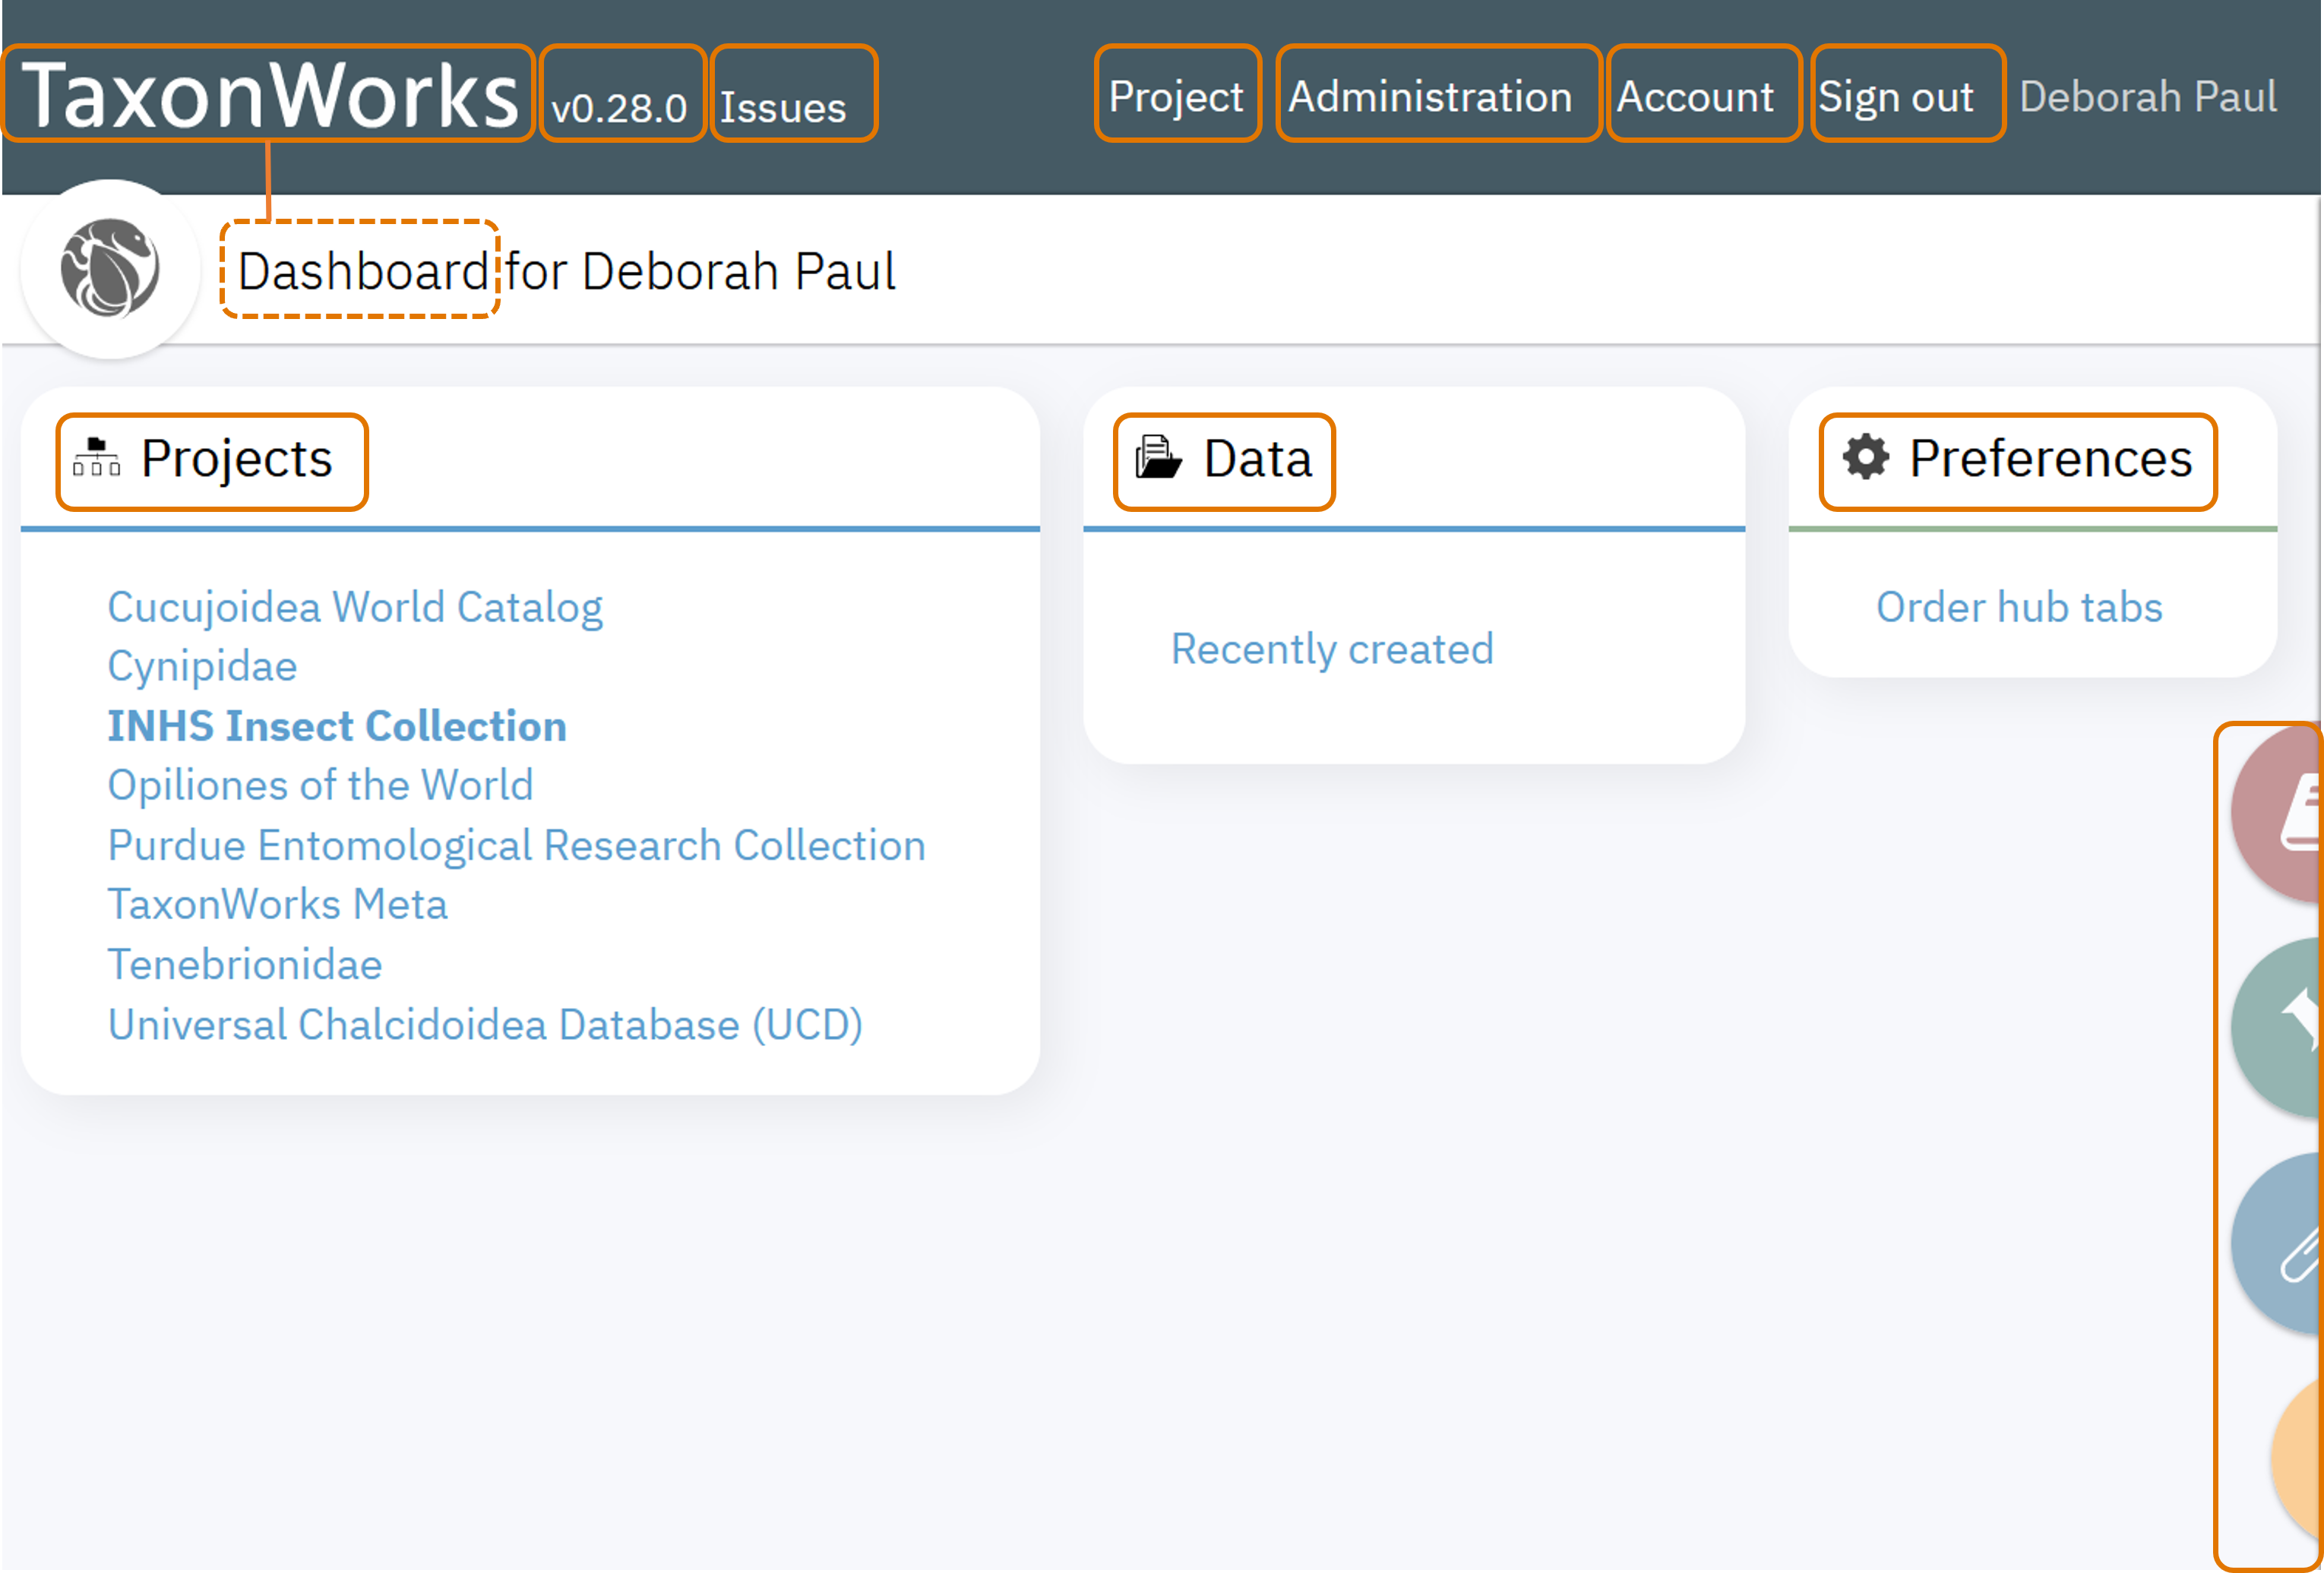 screenshot of the TaxonWorks User Interface options after logging in